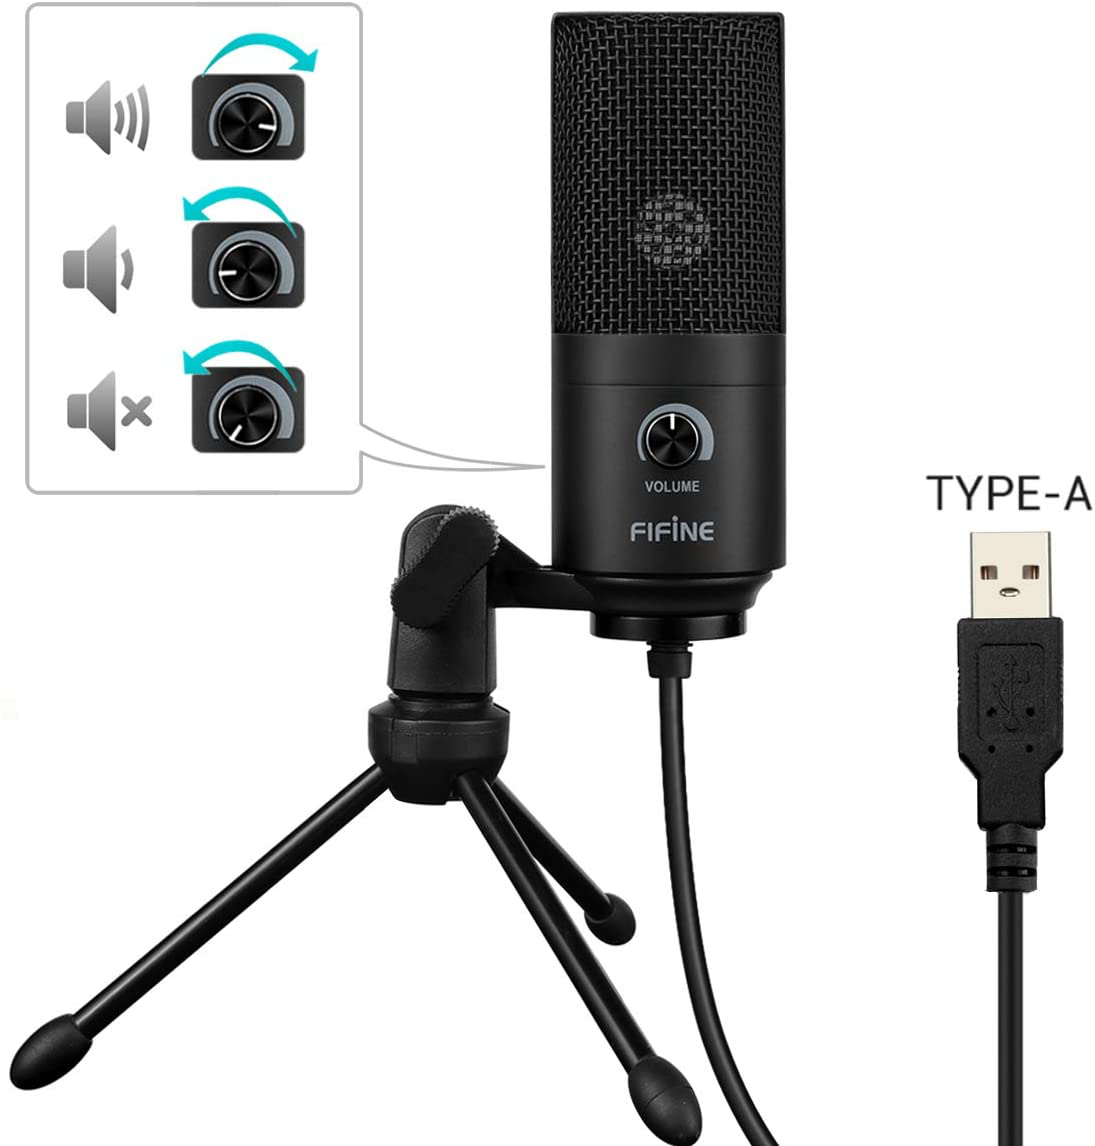 USB Microphone,FIFINE Metal Condenser Recording Microphone for Laptop MAC or Windows Cardioid Studio Recording Vocals, Voice Overs,Streaming Broadcast and YouTube Videos-K669B